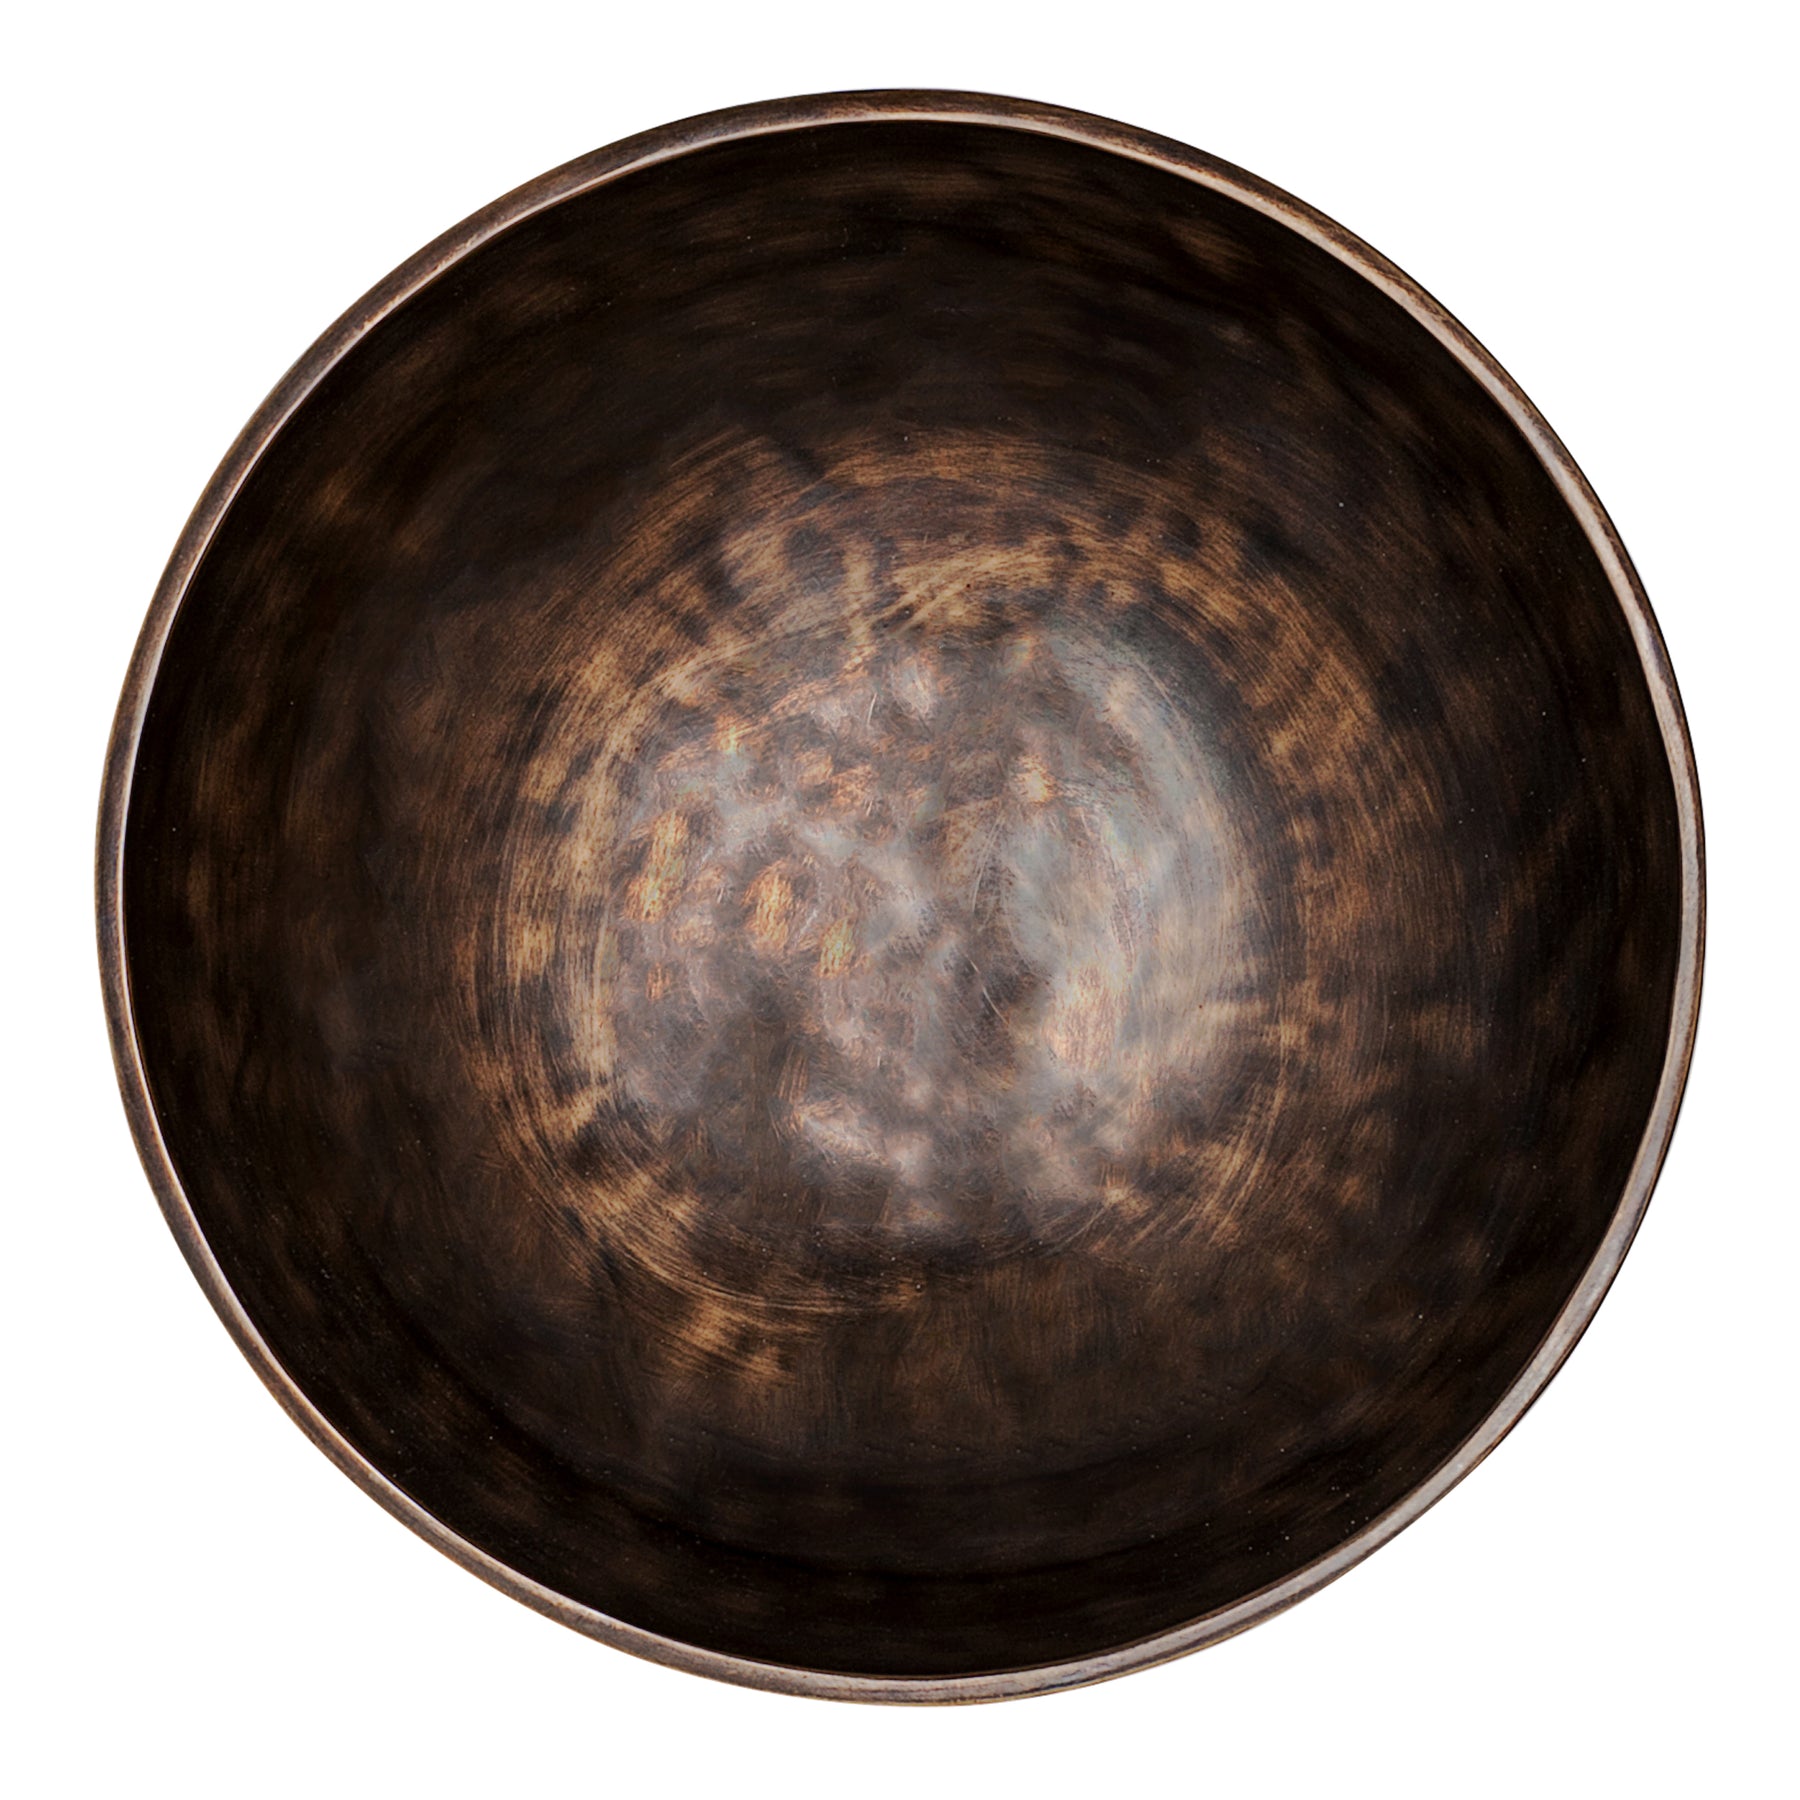 The Earth Bundle: Set Of 2 Resonant Bronze Singing Bowls From Nepal, 9 inch and 6 inch